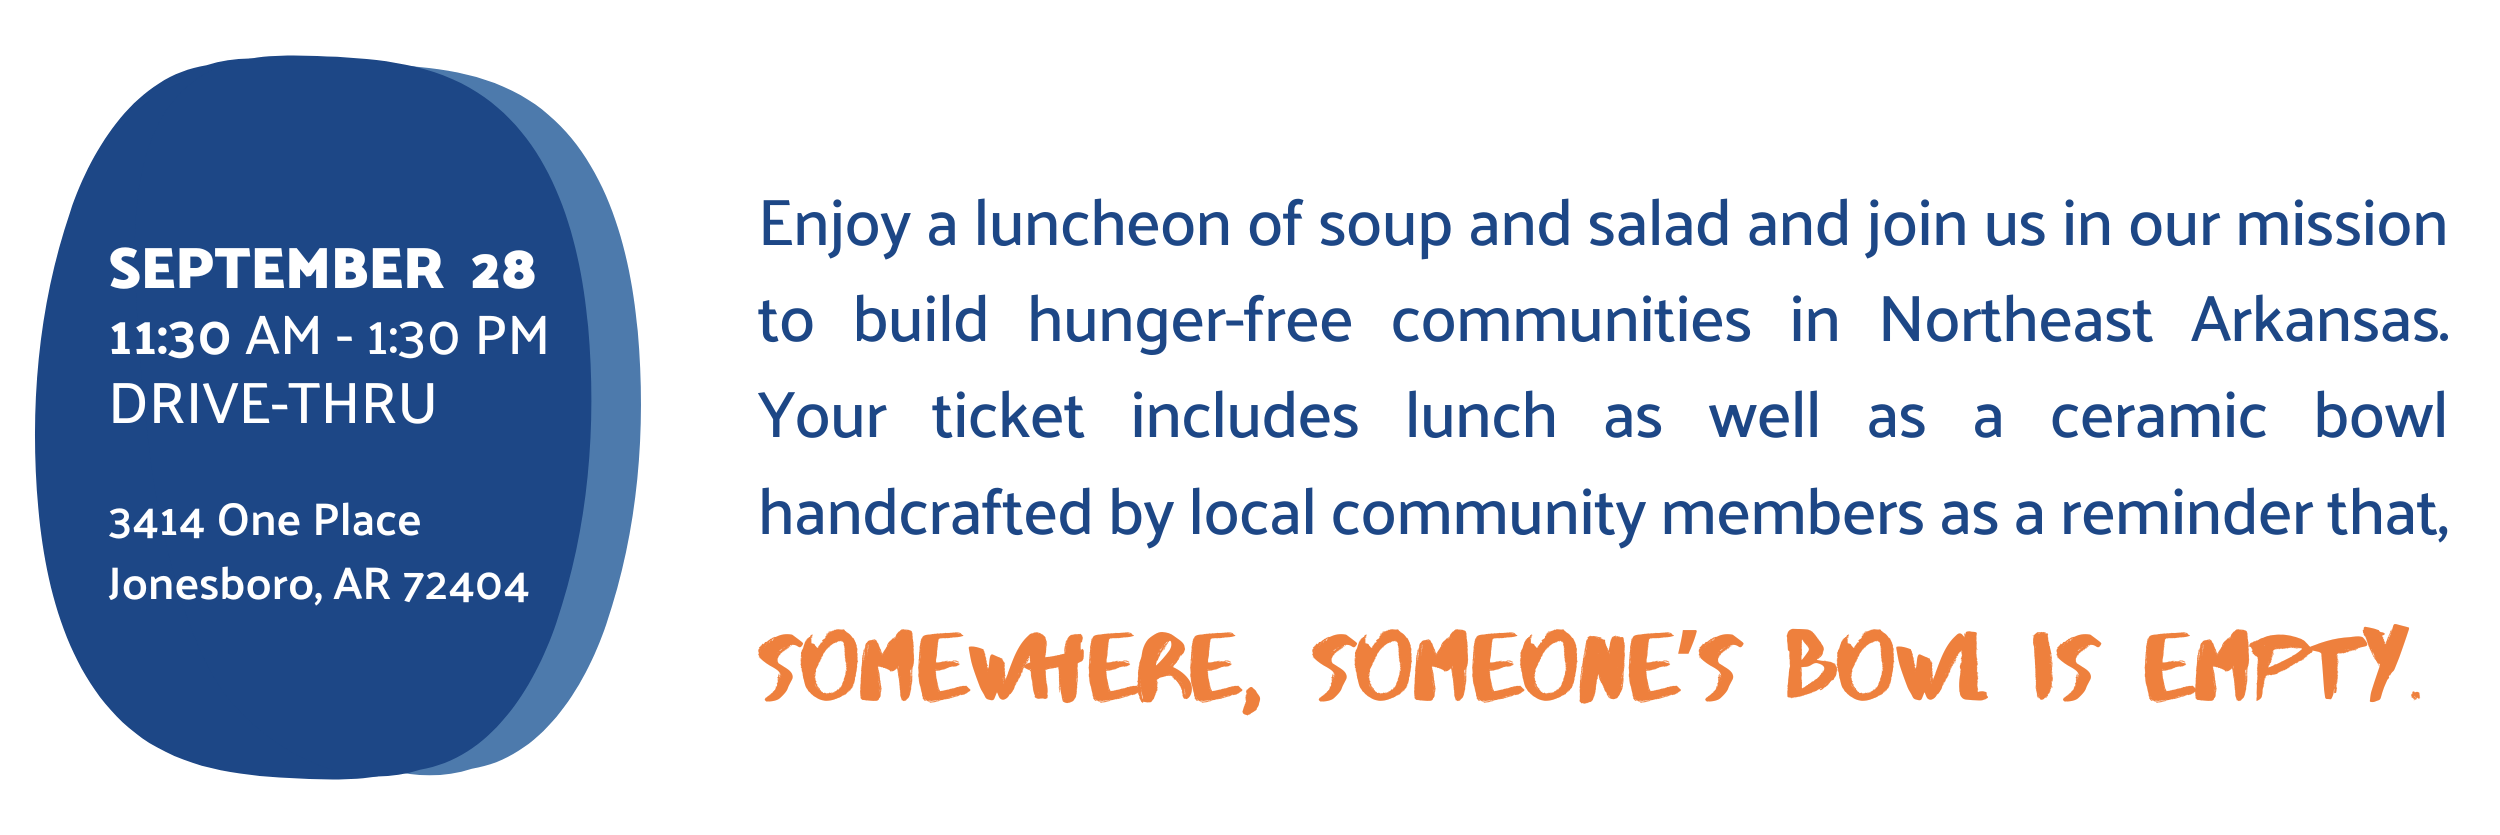 Enjoy a luncheon of soup and salad and join us in our mission to build hunger-free communities in Northeast Arkansas. Your ticket includes lunch as well as a ceramic bowl handcrafted by local community members as a reminder that, somewhere, someone’s bowl is empty.